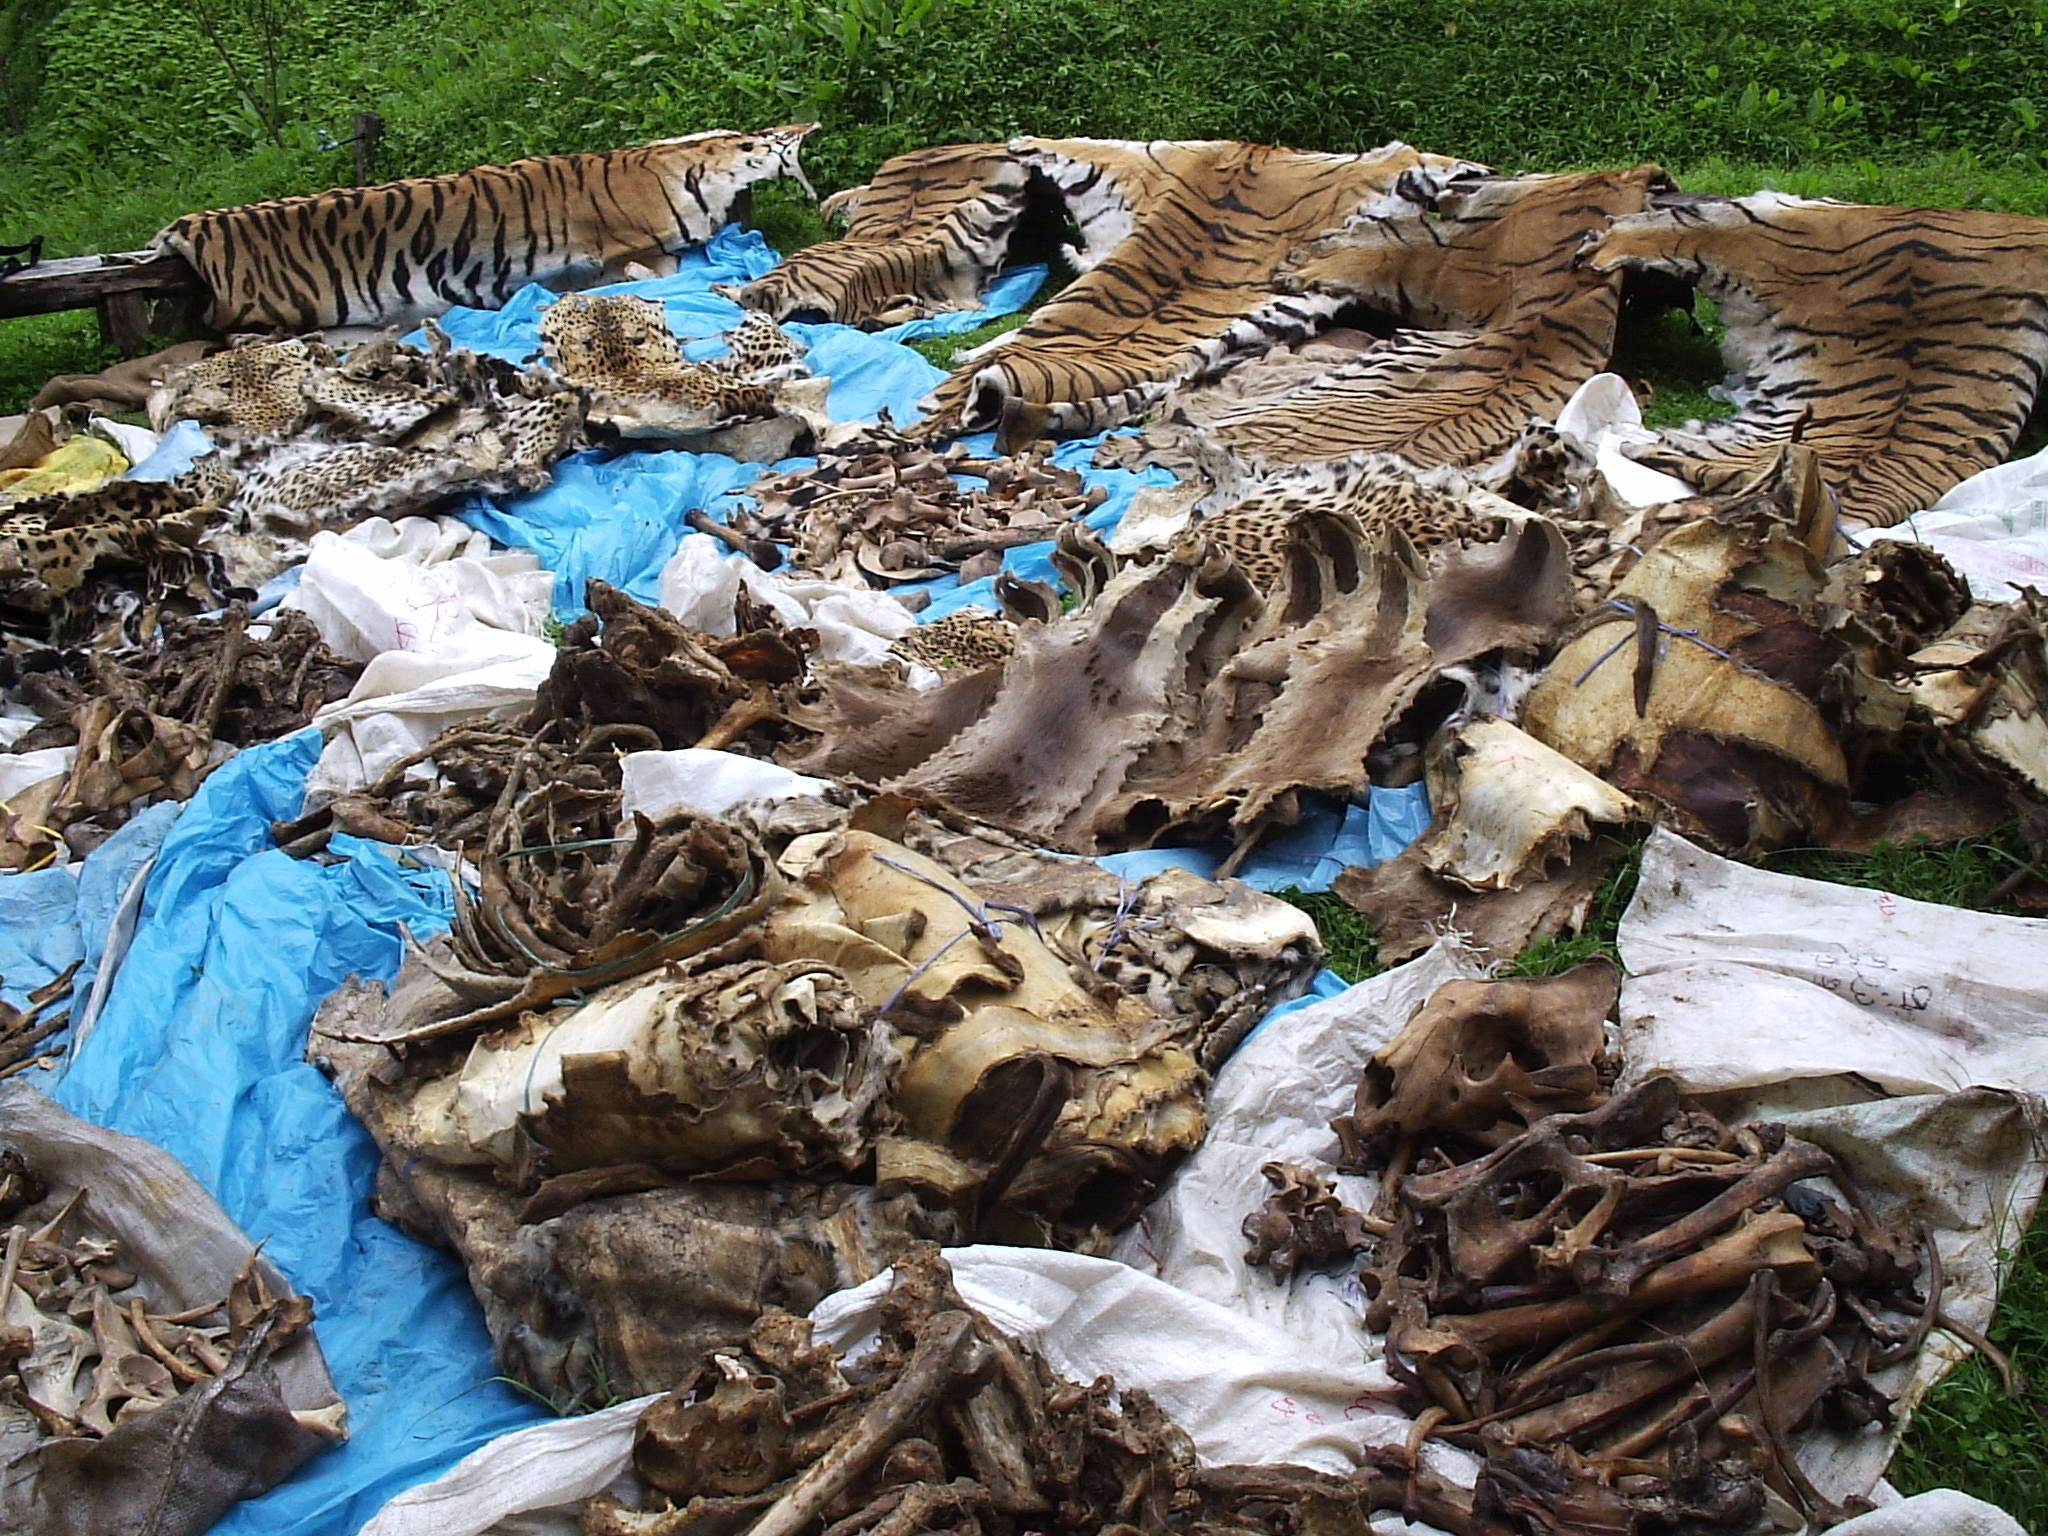 Confiscated tiger skins